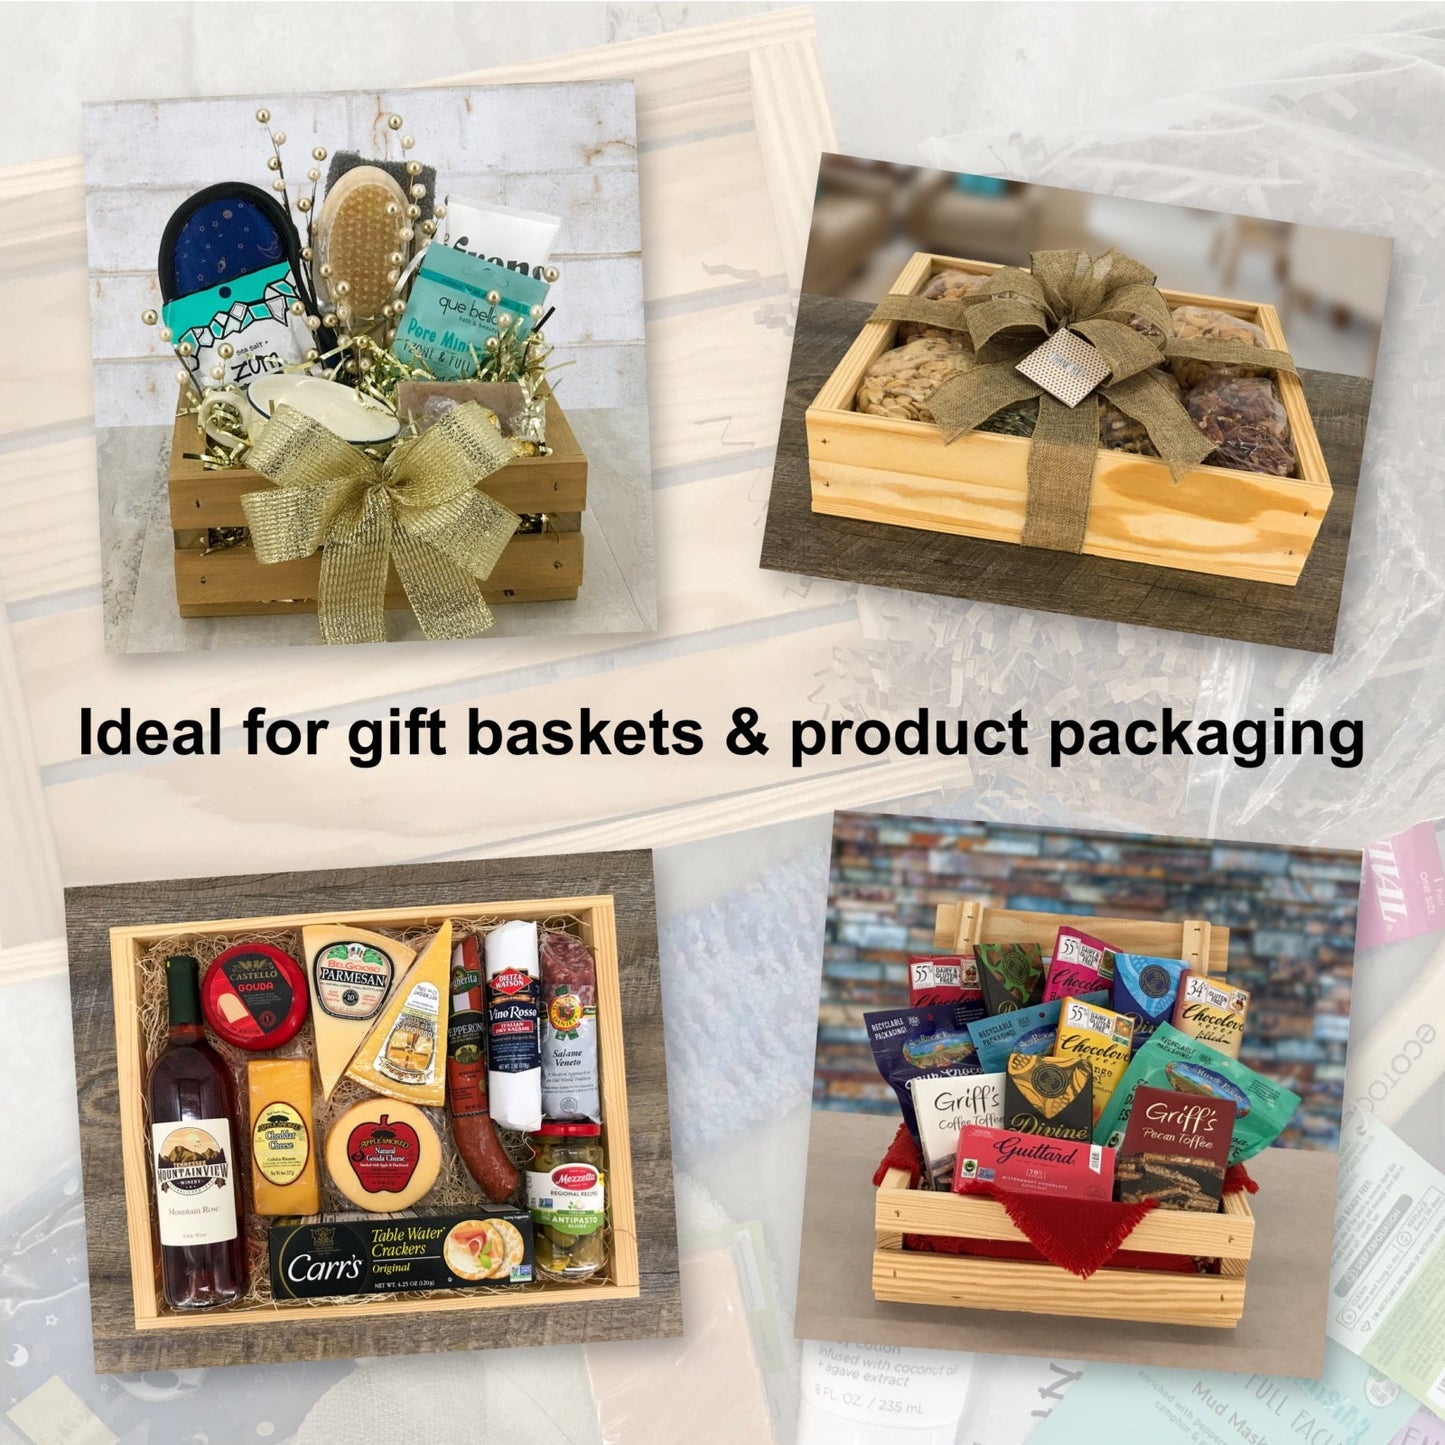 Ideal for gift baskets and product packaging, BX-12-9.75-5.25-ST-NW-NL, 6-BX-12-9.75-5.25-ST-NW-NL, 12-BX-12-9.75-5.25-ST-NW-NL, 24-BX-12-9.75-5.25-ST-NW-NL, 48-BX-12-9.75-5.25-ST-NW-NL, 96-BX-12-9.75-5.25-ST-NW-NL